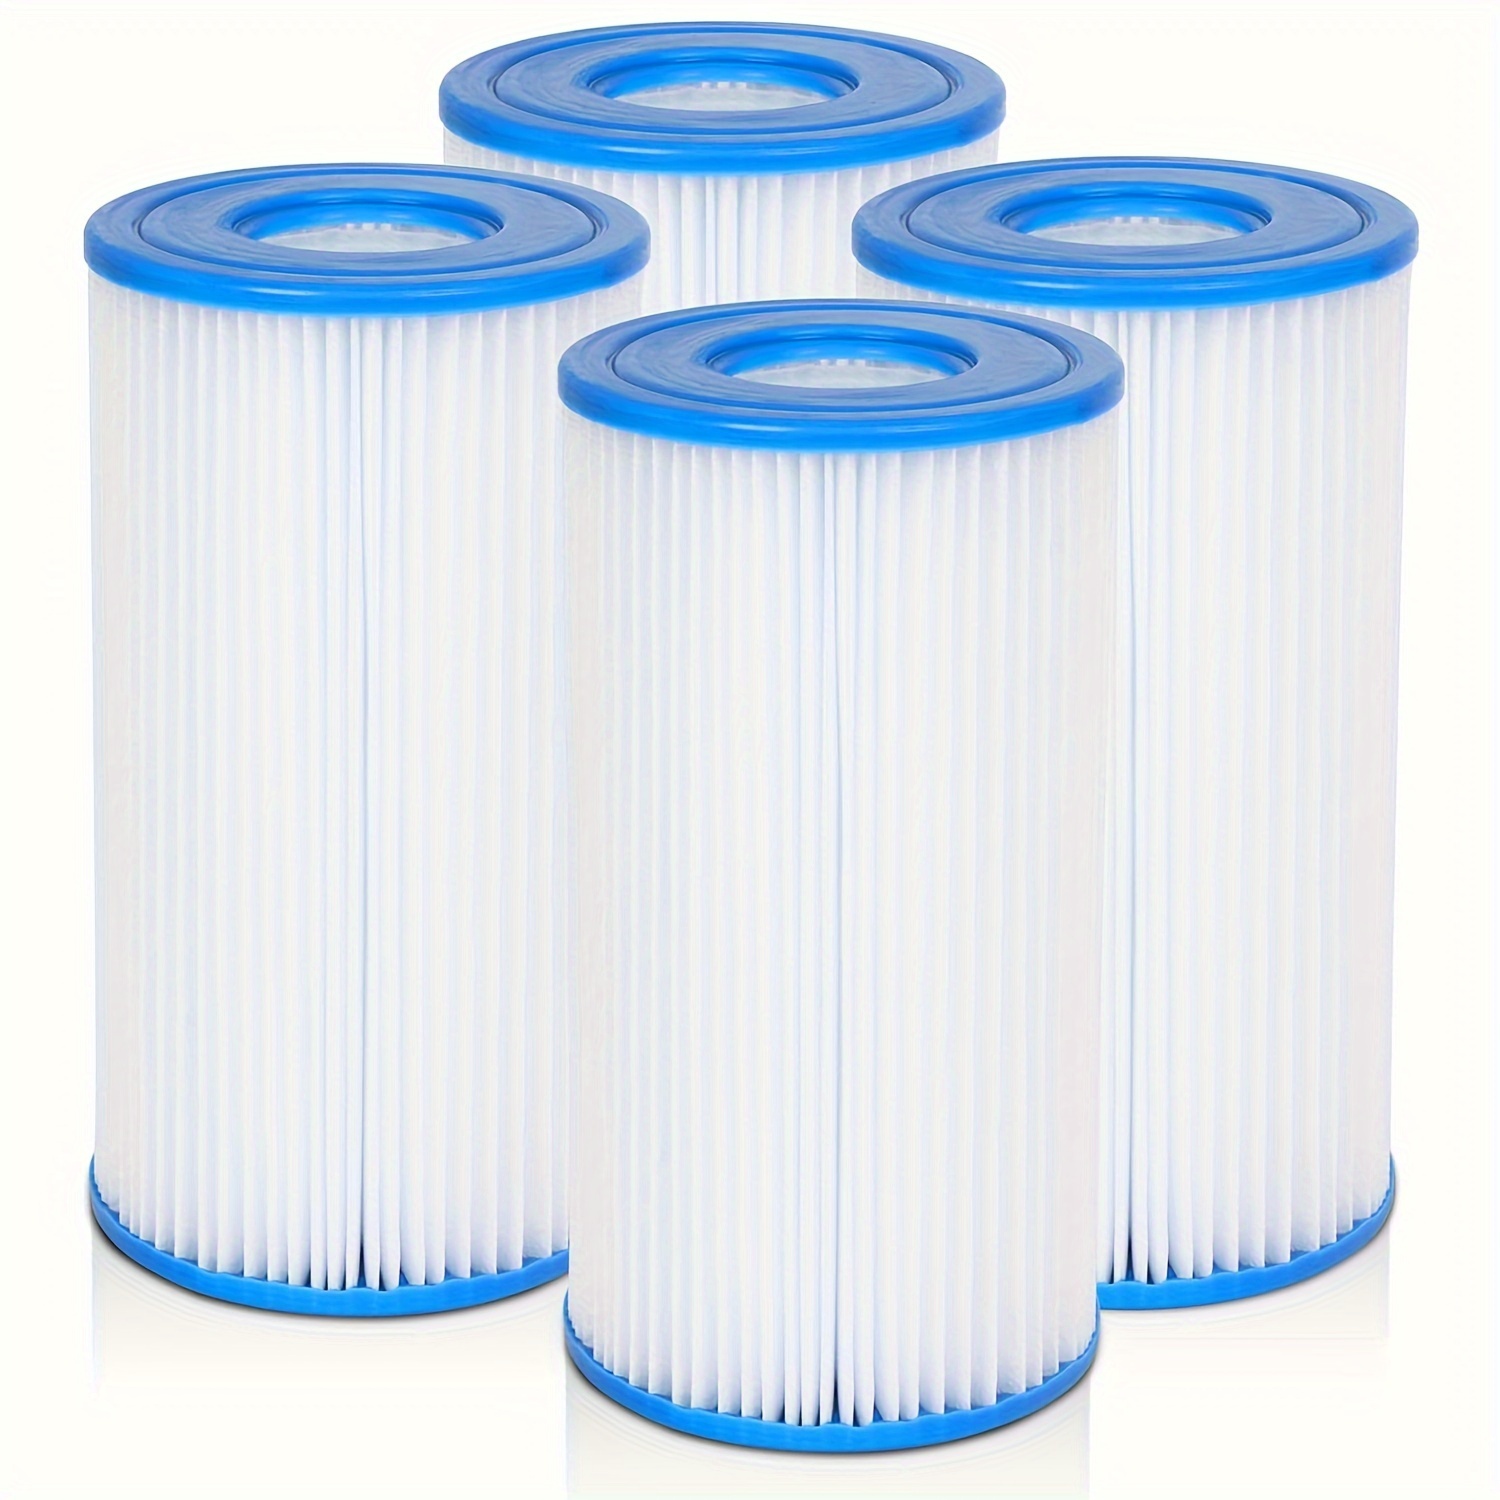 

4/6pcs, Pool Filter Cartridge Type Iii, Compatible With Krystal Clear 530/1000 Gph Pool Pump And More, Easy Set Replacement Cartridge, For Outdoor Garden Pool Supplies 8in Height X 4.2in Diameter